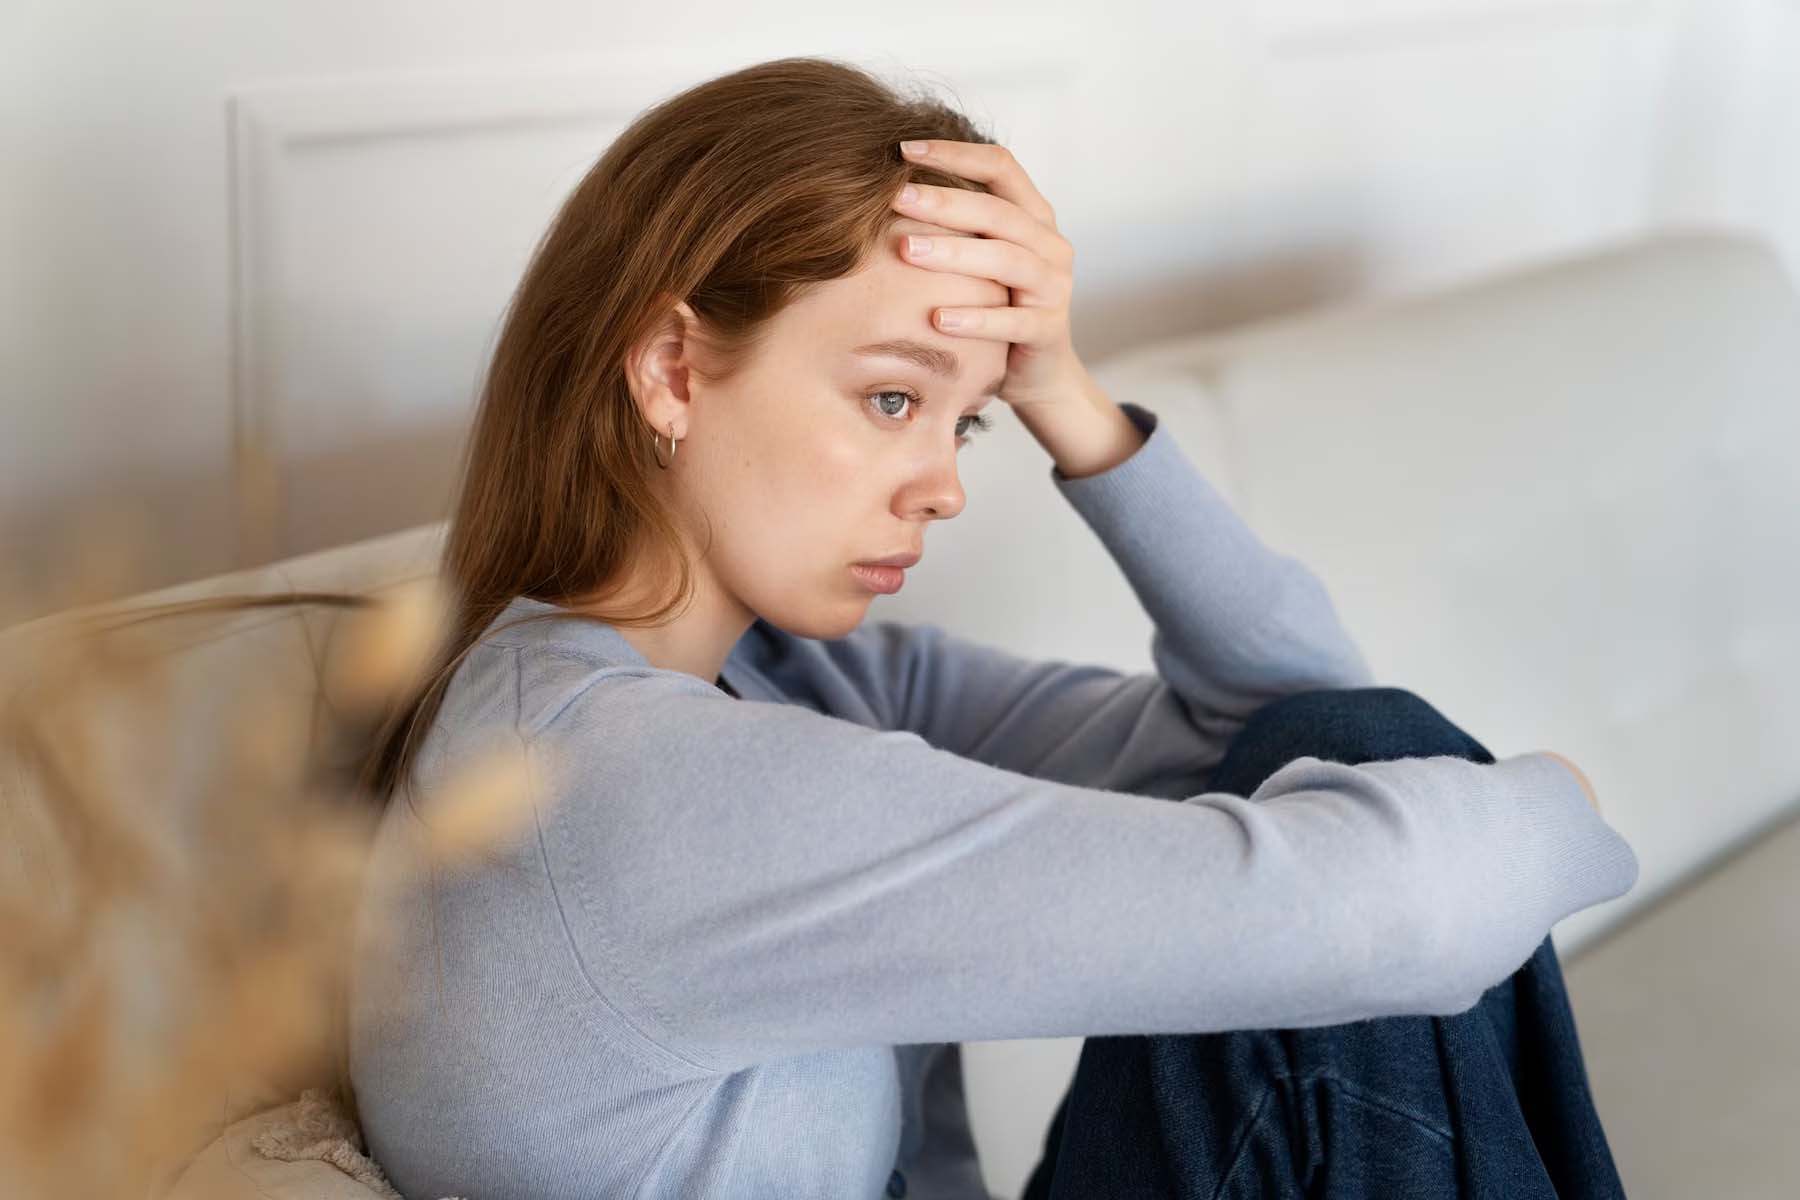 Anxious woman sitting on couch side view